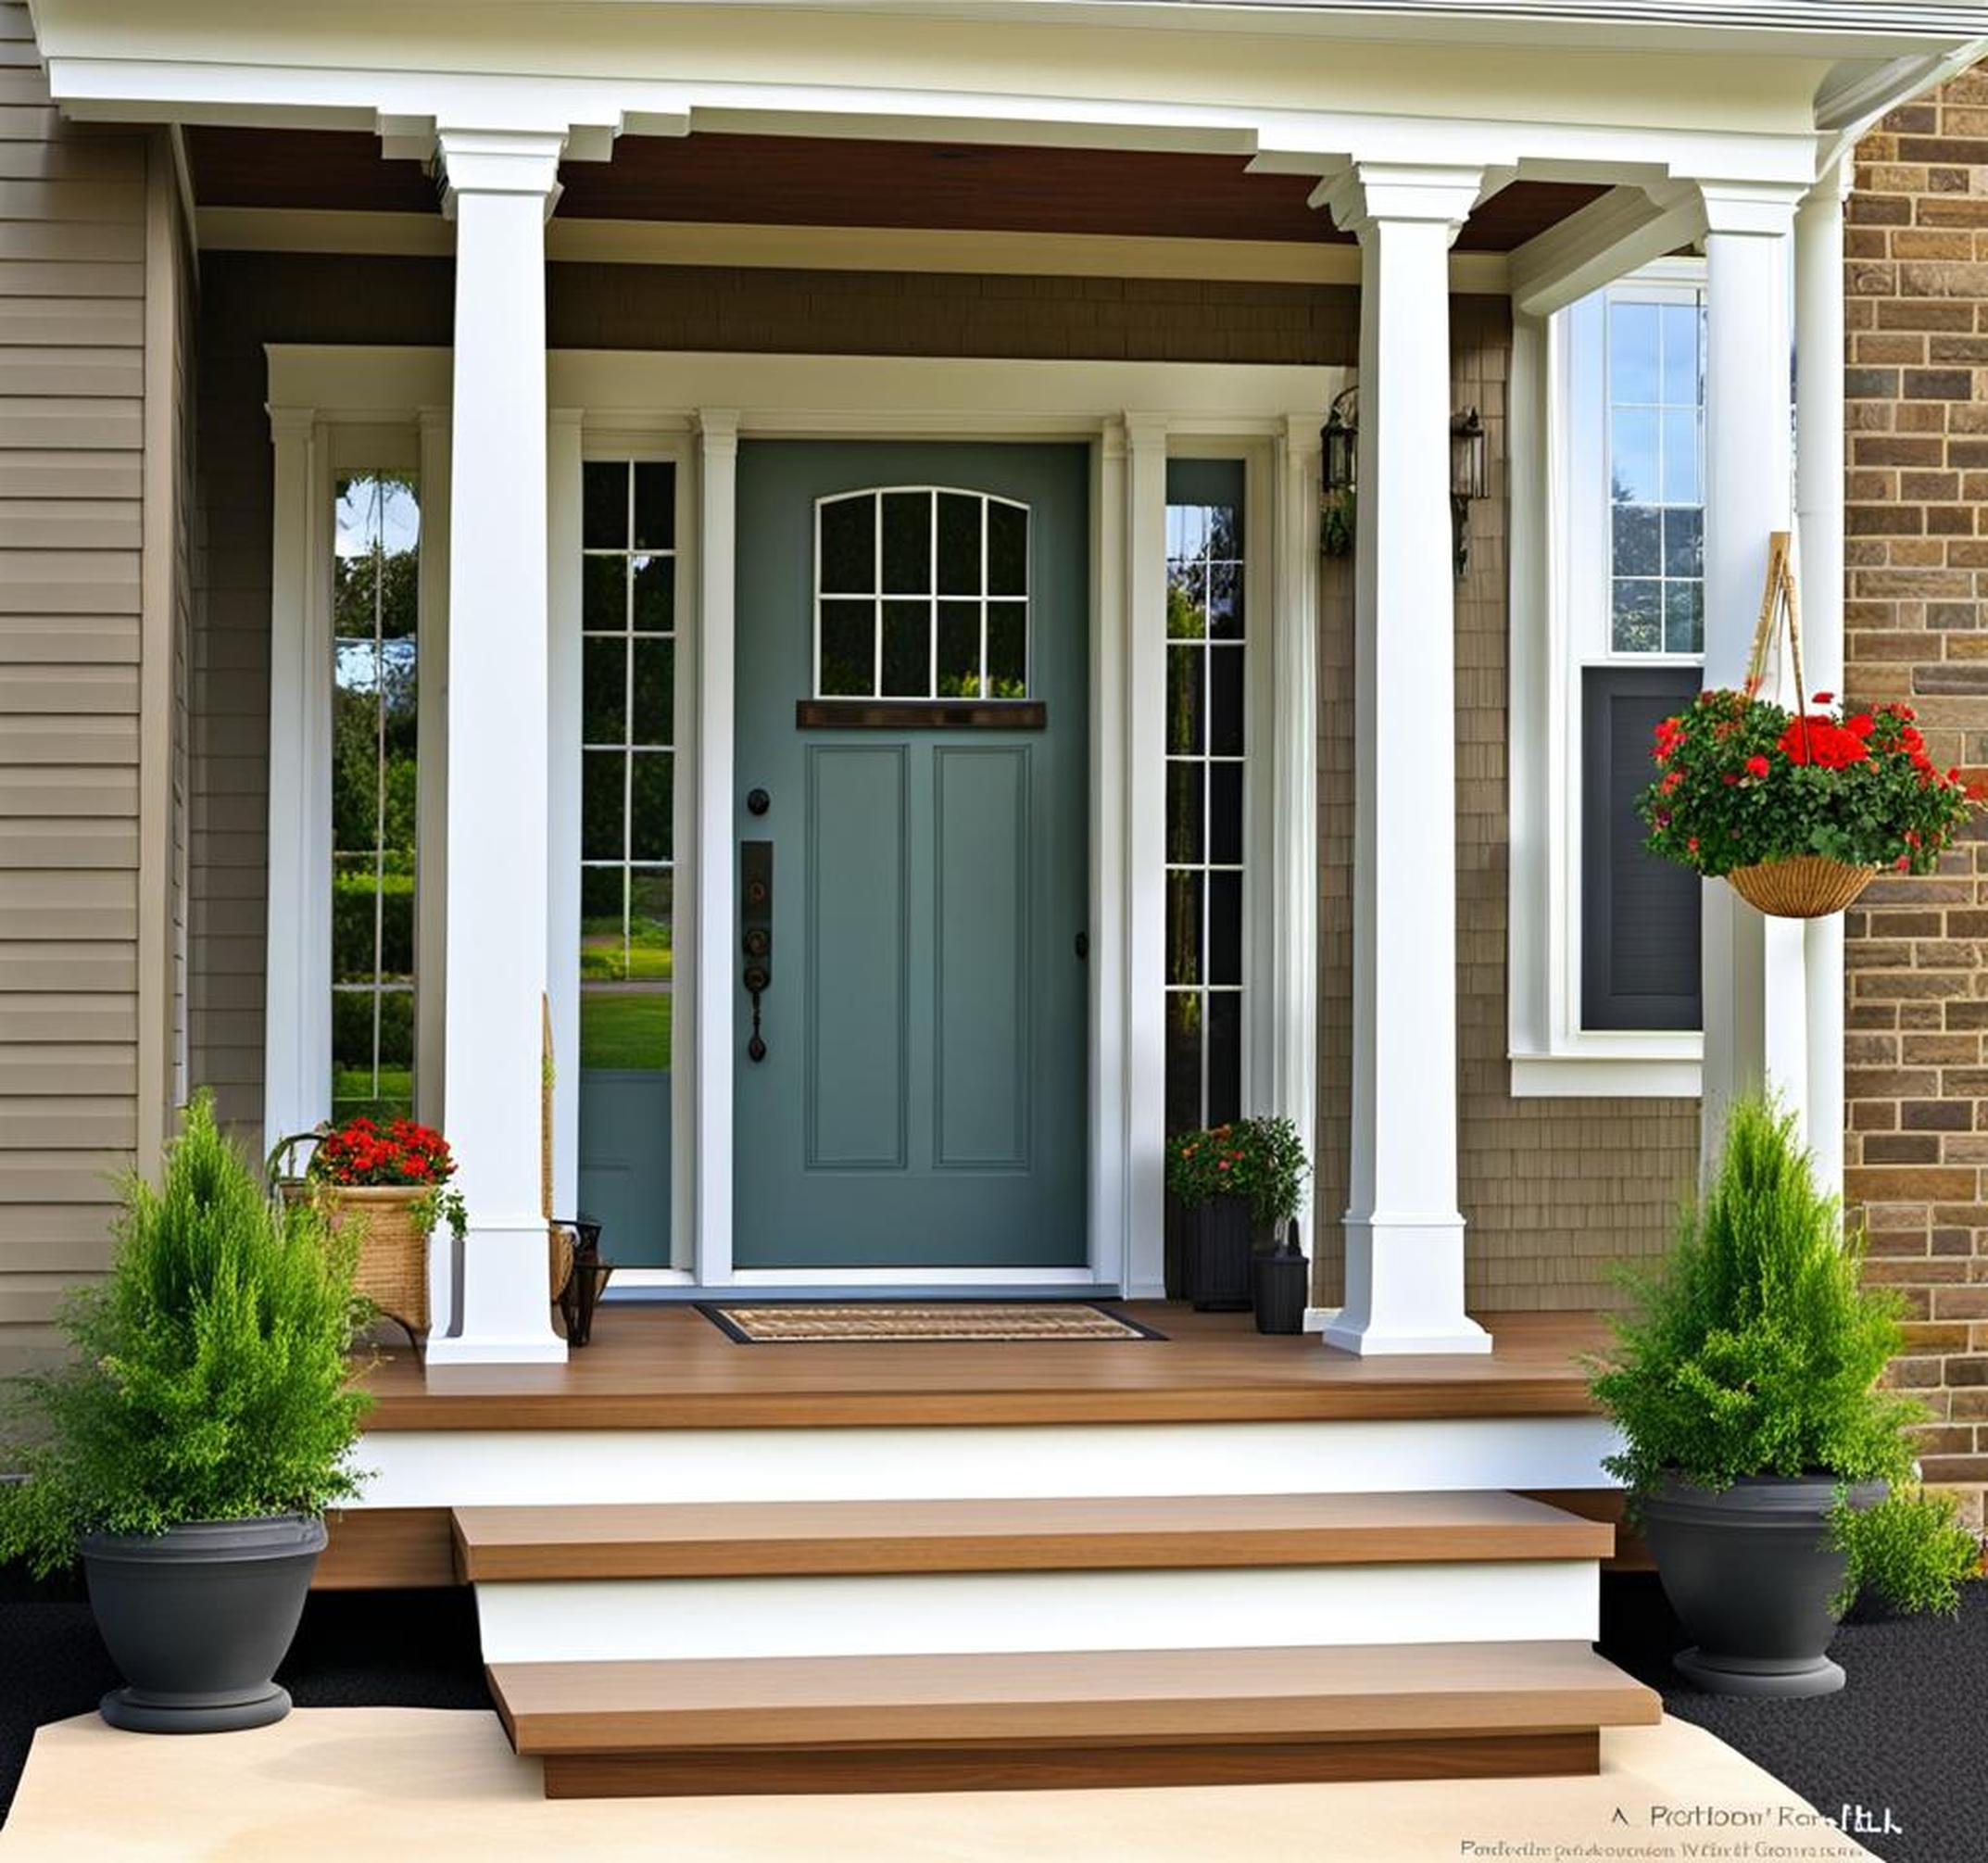 Replacing Your Front Porch Columns? Read This First